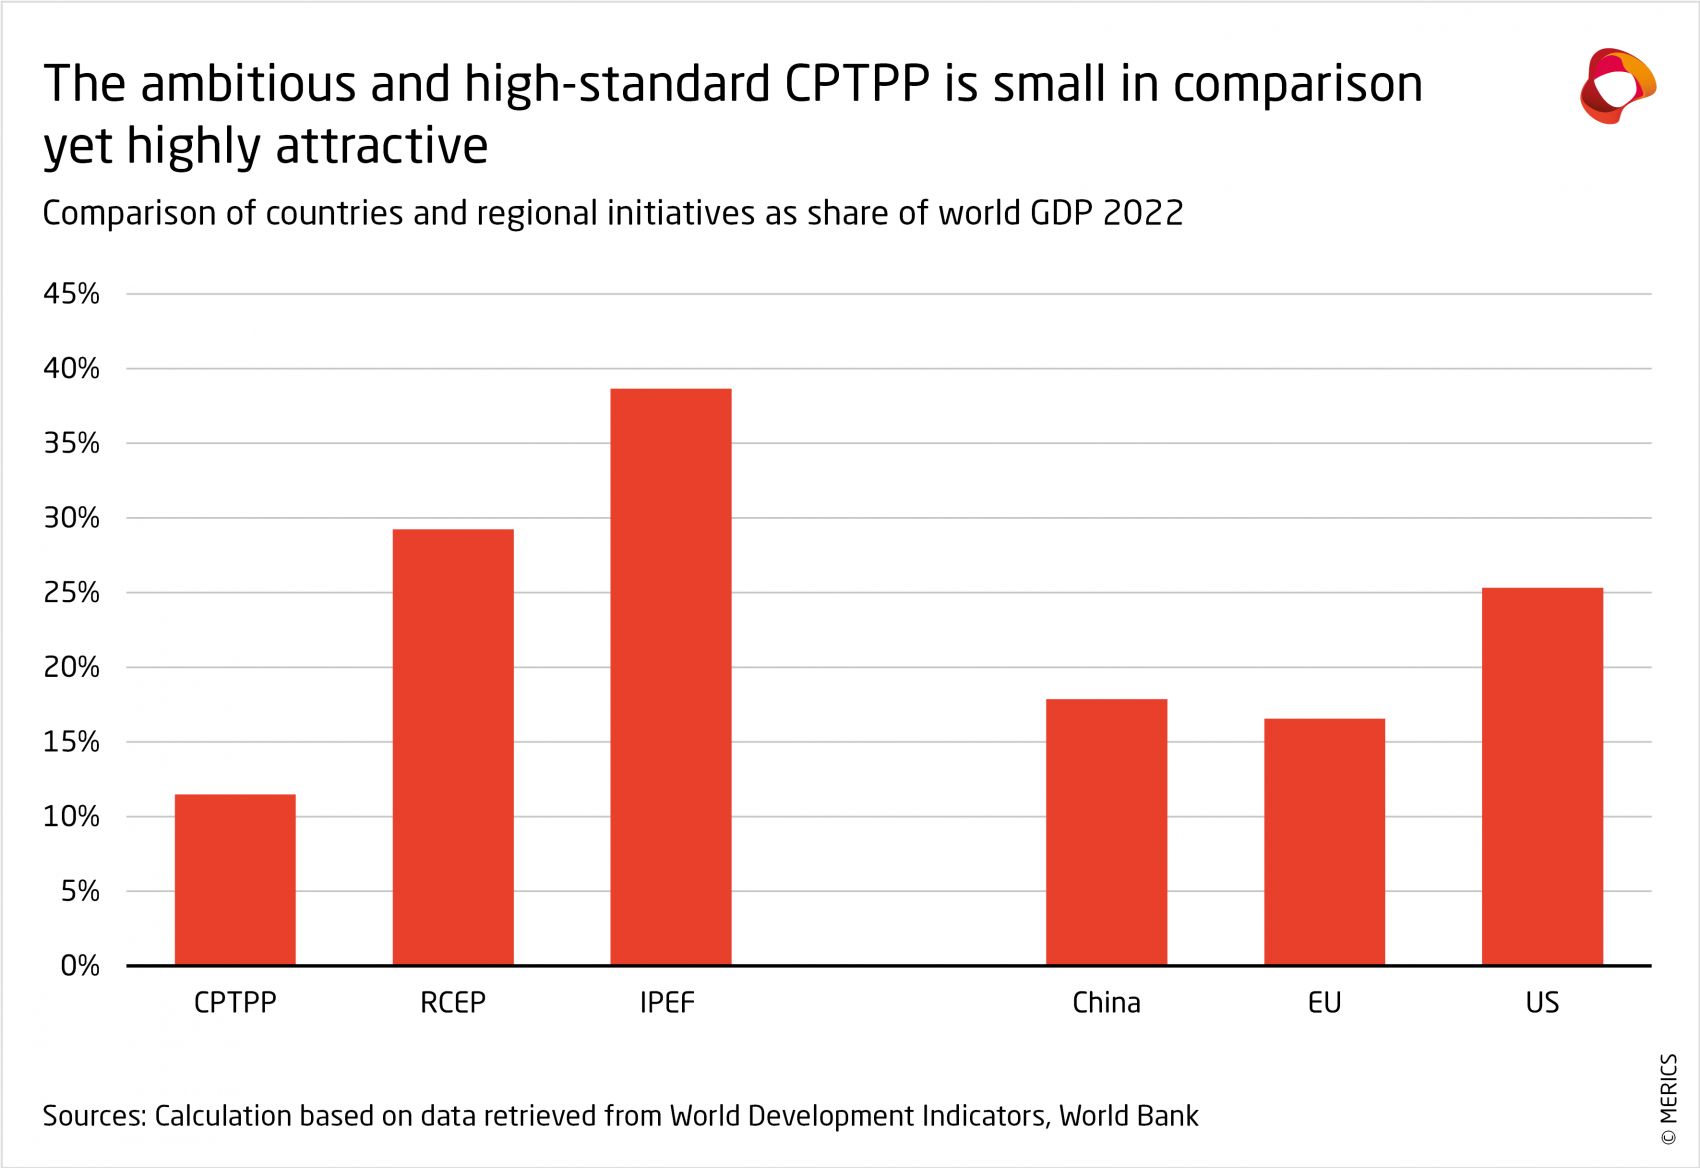 merics-cptpp-comparison-countries-regional initiatives-as-share-of-world-gdp-2022.png